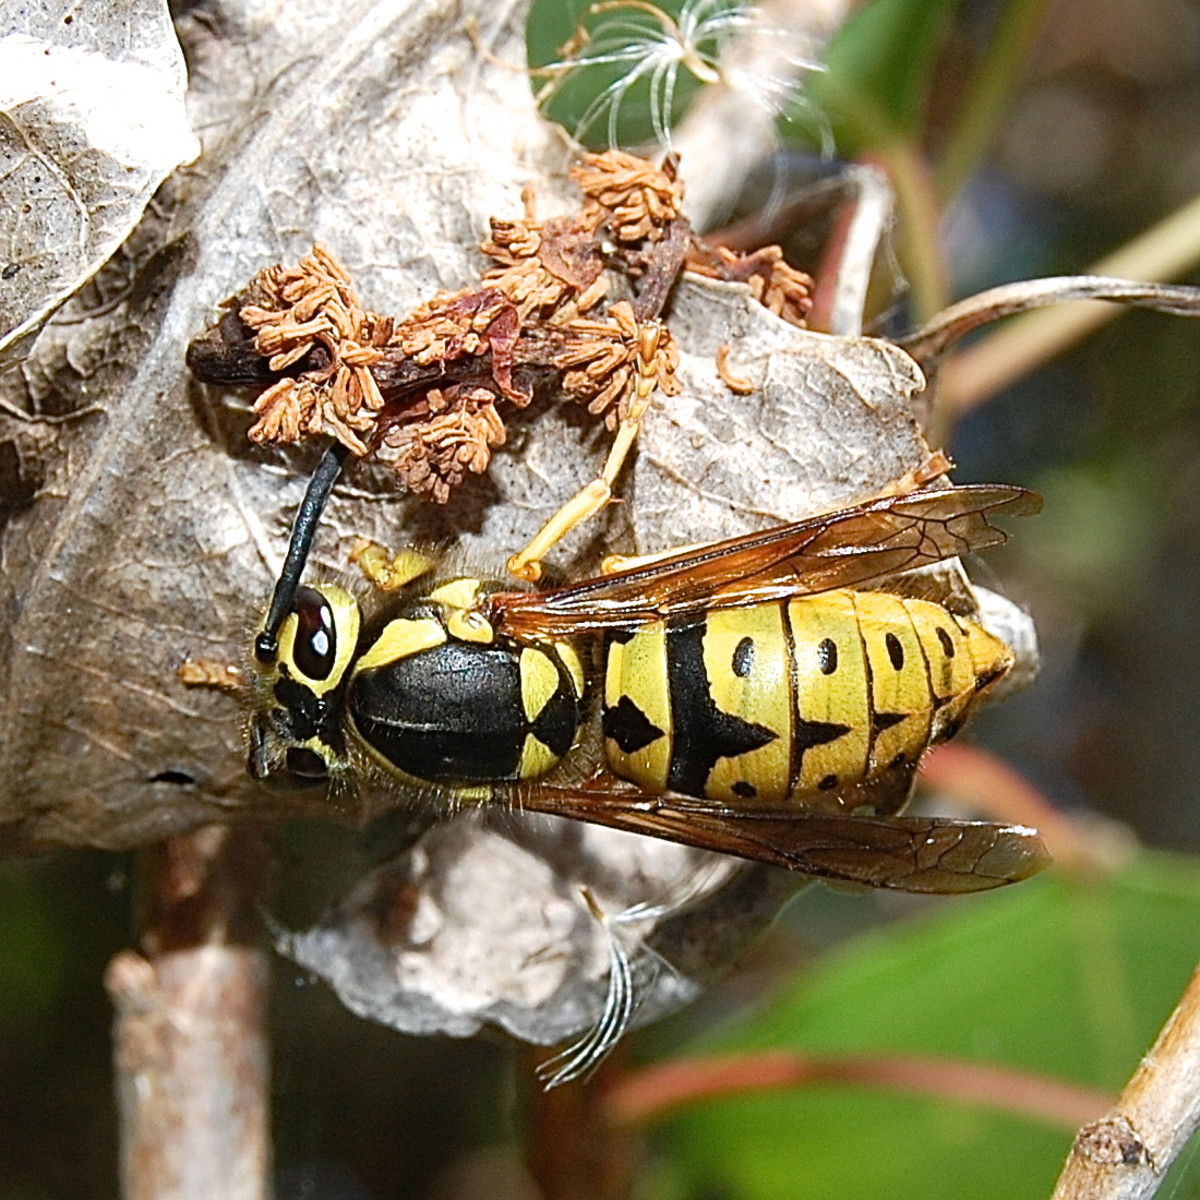 A western yellow jacket queen (Vespula pensylvanica) in North America: yellow jackets are a type of wasp but aren't hornets.